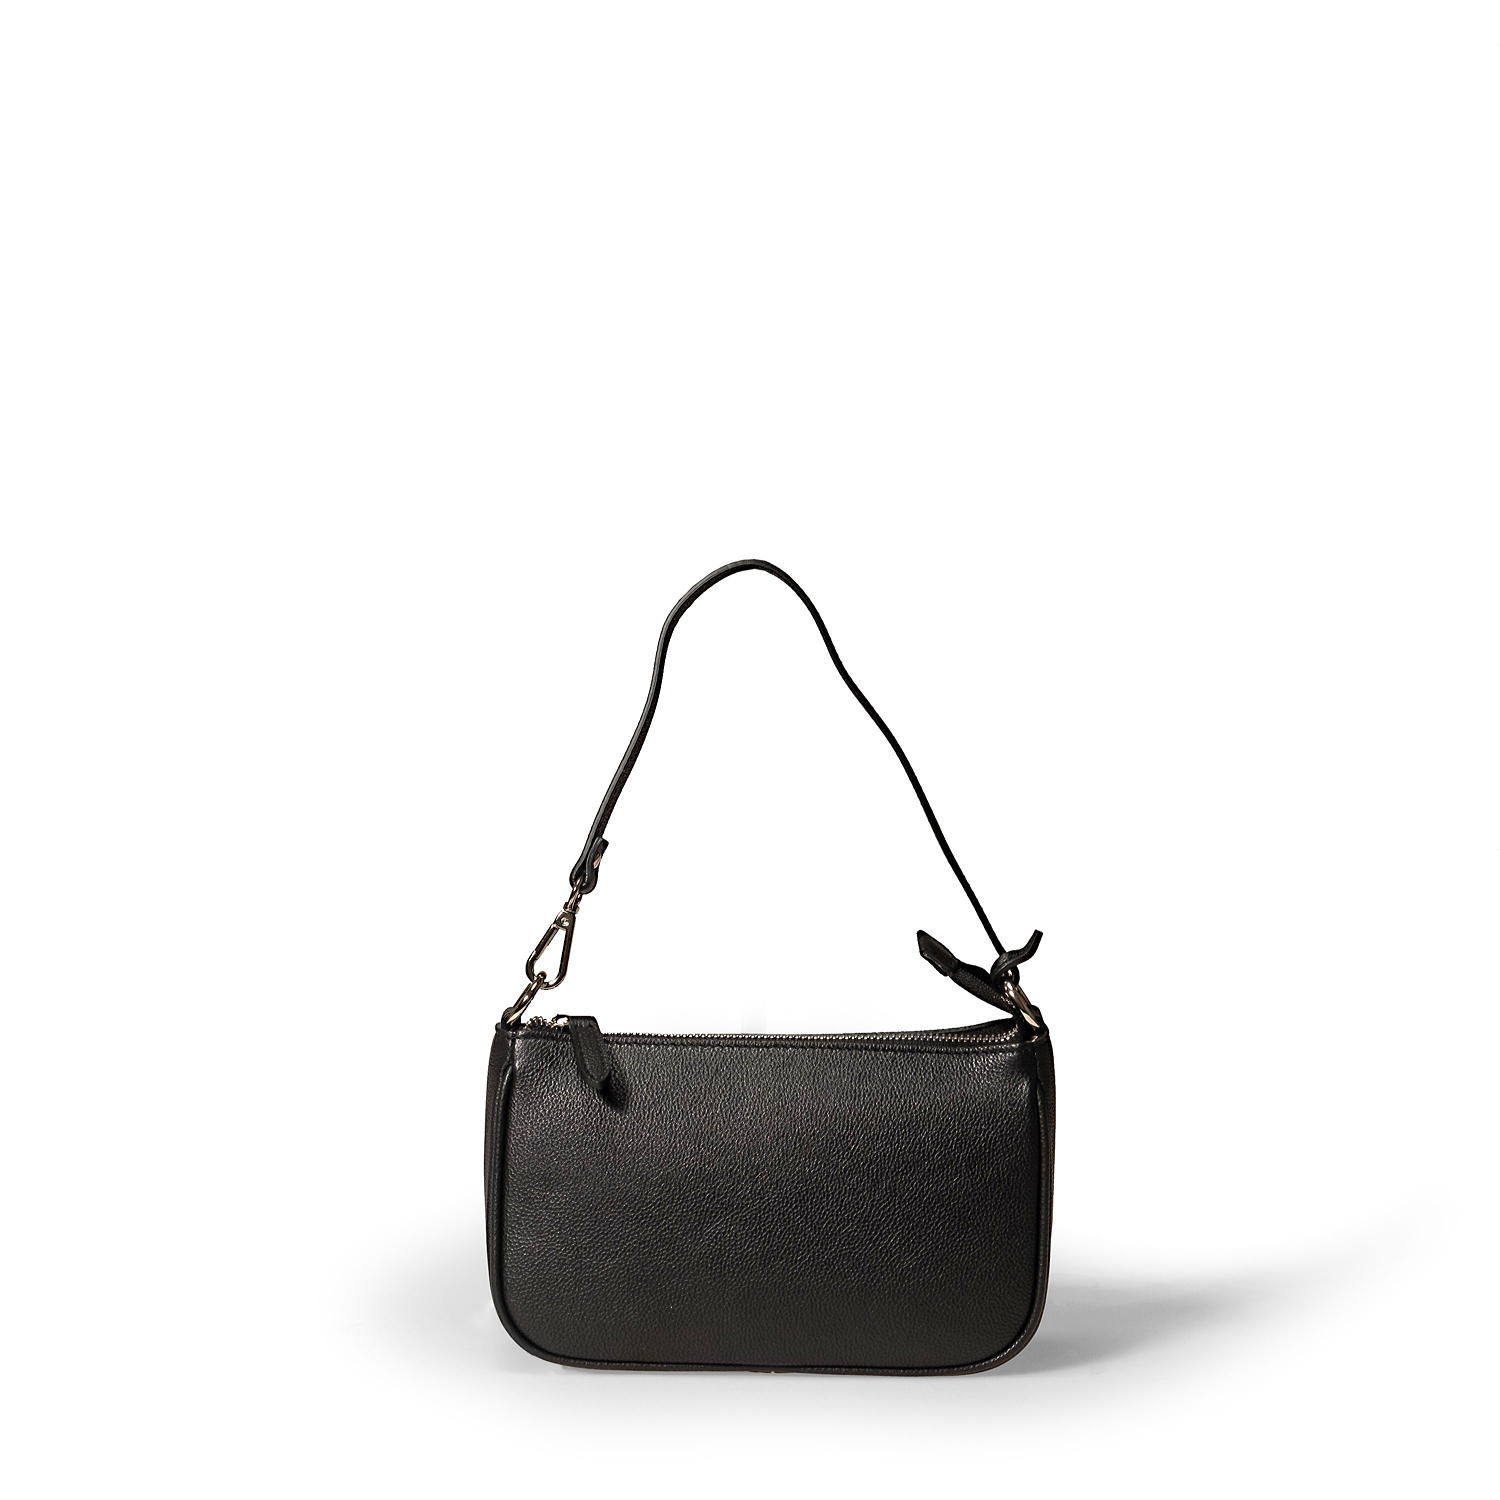 High quality leather handbags Made in Italy by Bellini. Wholesale, OEM, private label handbags.